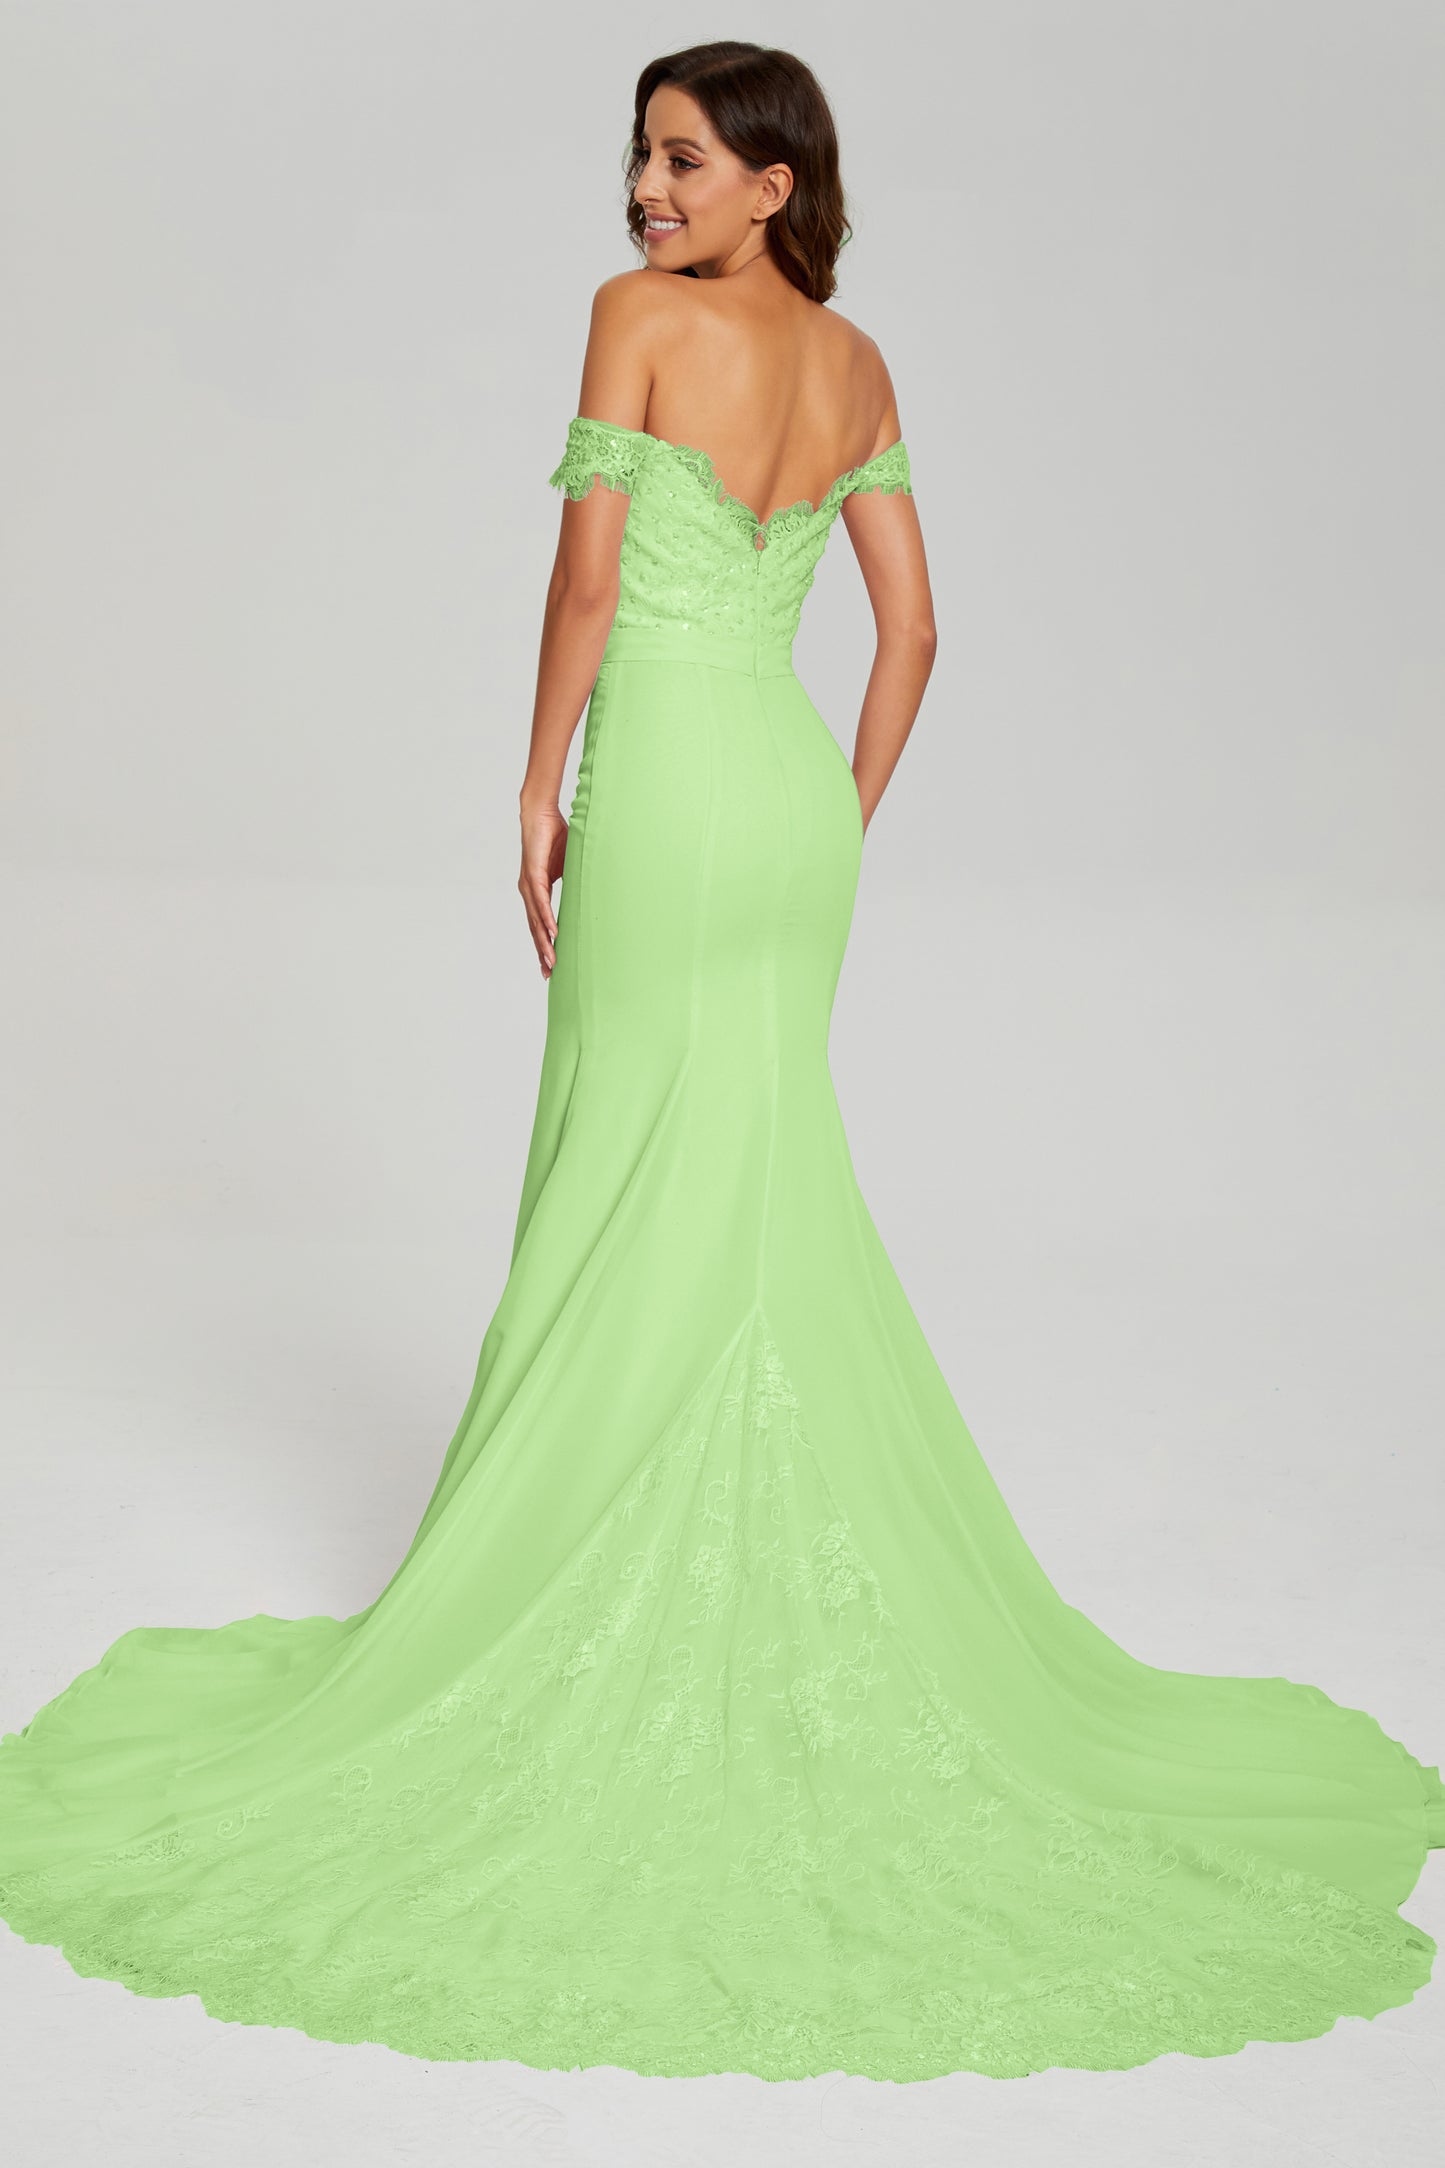 Mermaid Off the Shoulder Prom Dresses with Trailing